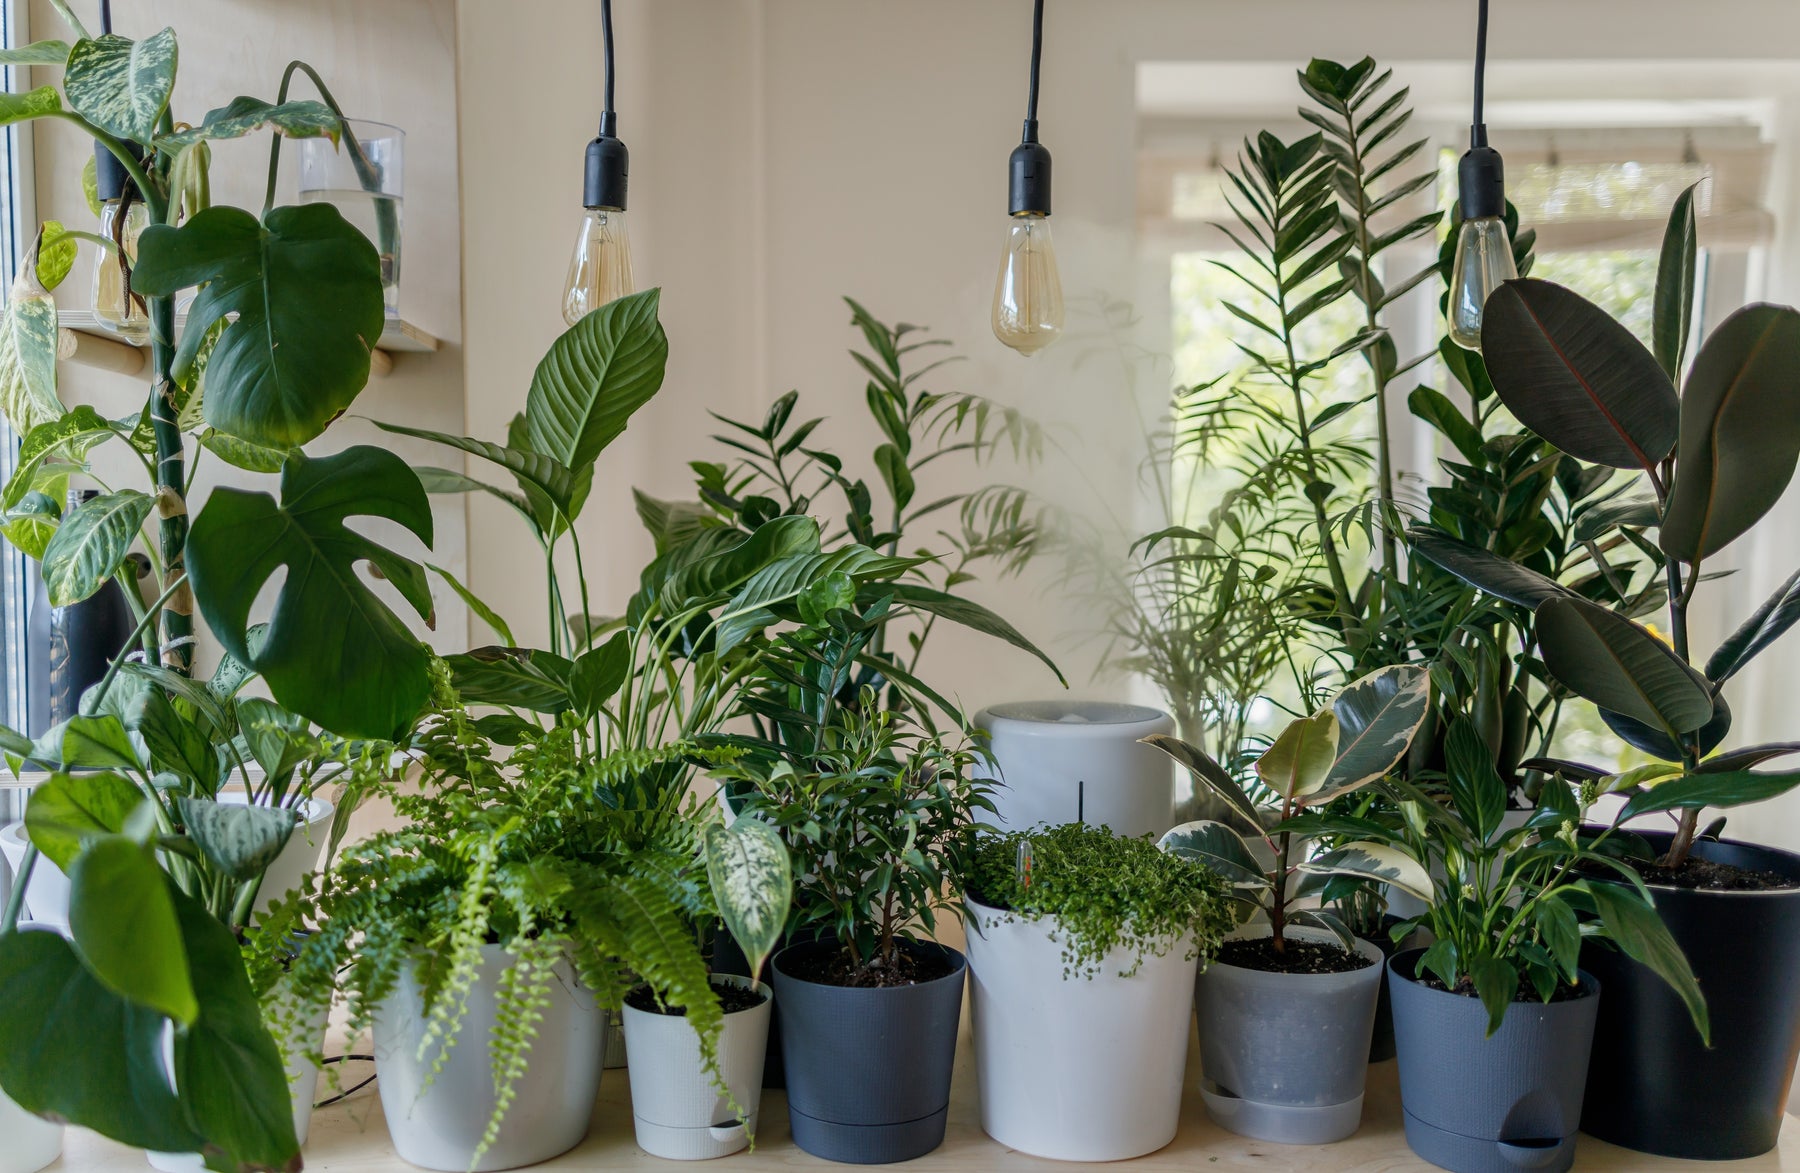 Indoor Gardening for Beginners - Why you NEED Self-Watering Planters